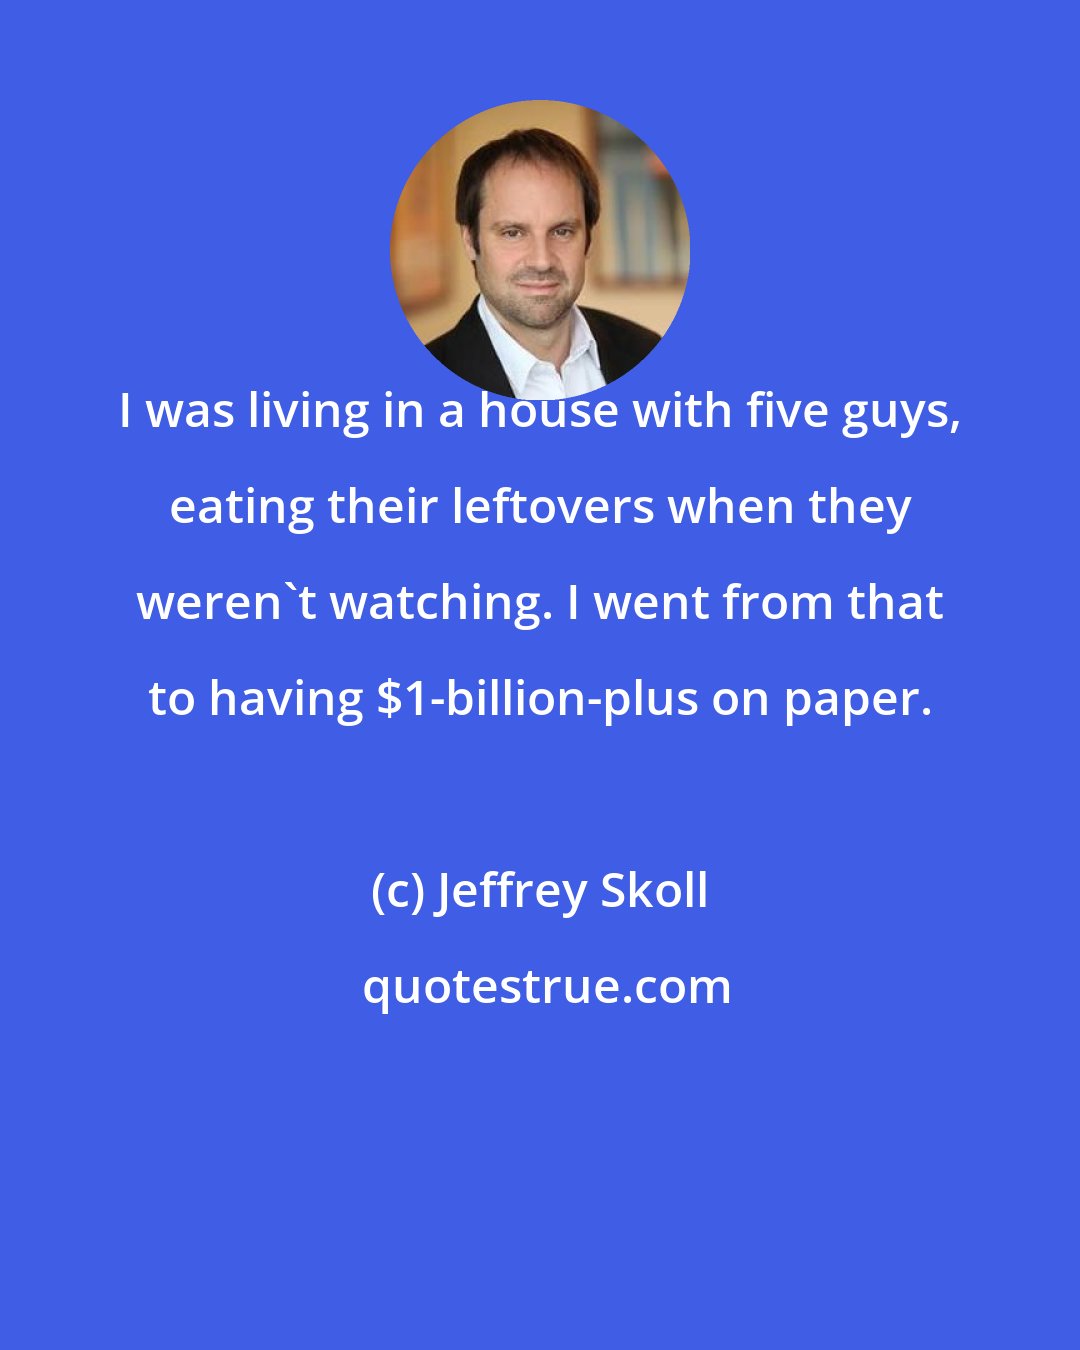 Jeffrey Skoll: I was living in a house with five guys, eating their leftovers when they weren't watching. I went from that to having $1-billion-plus on paper.